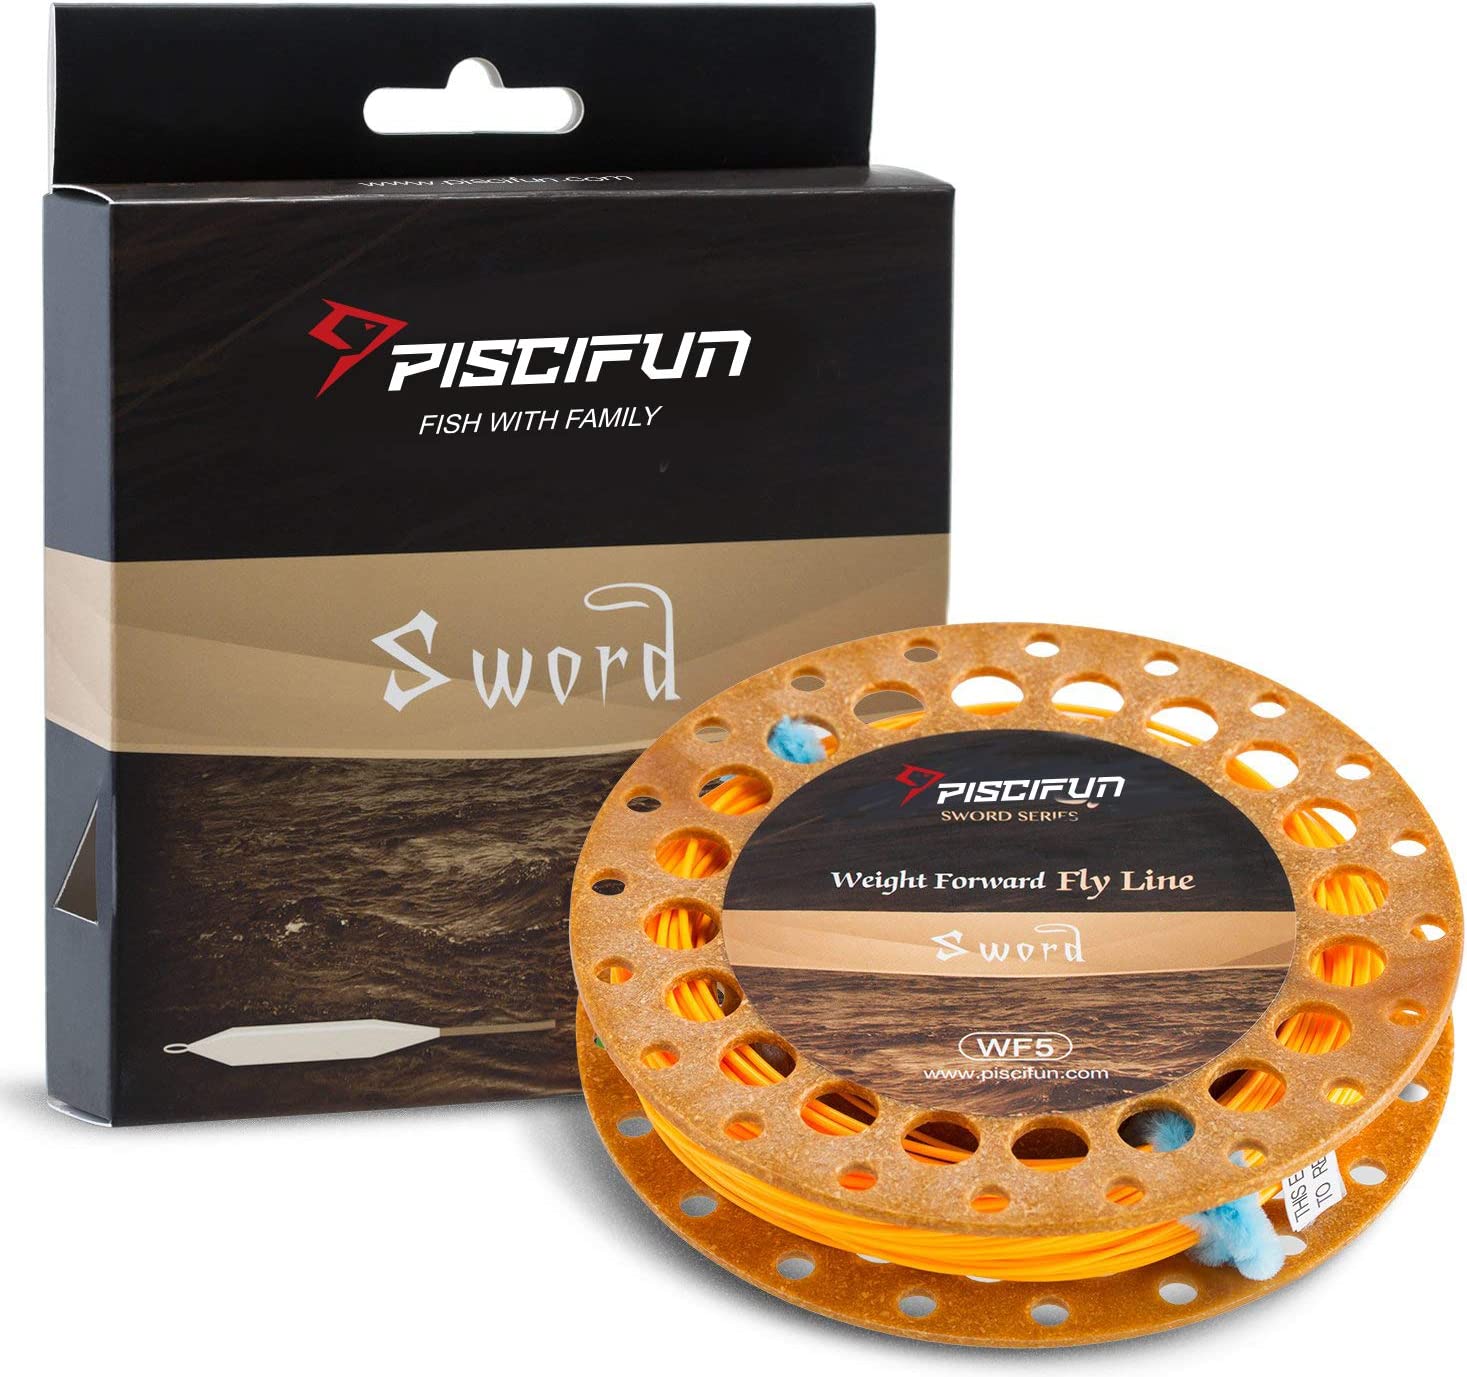 Piscifun Sword Fly Fishing Line with Welded Loop Weight Forward